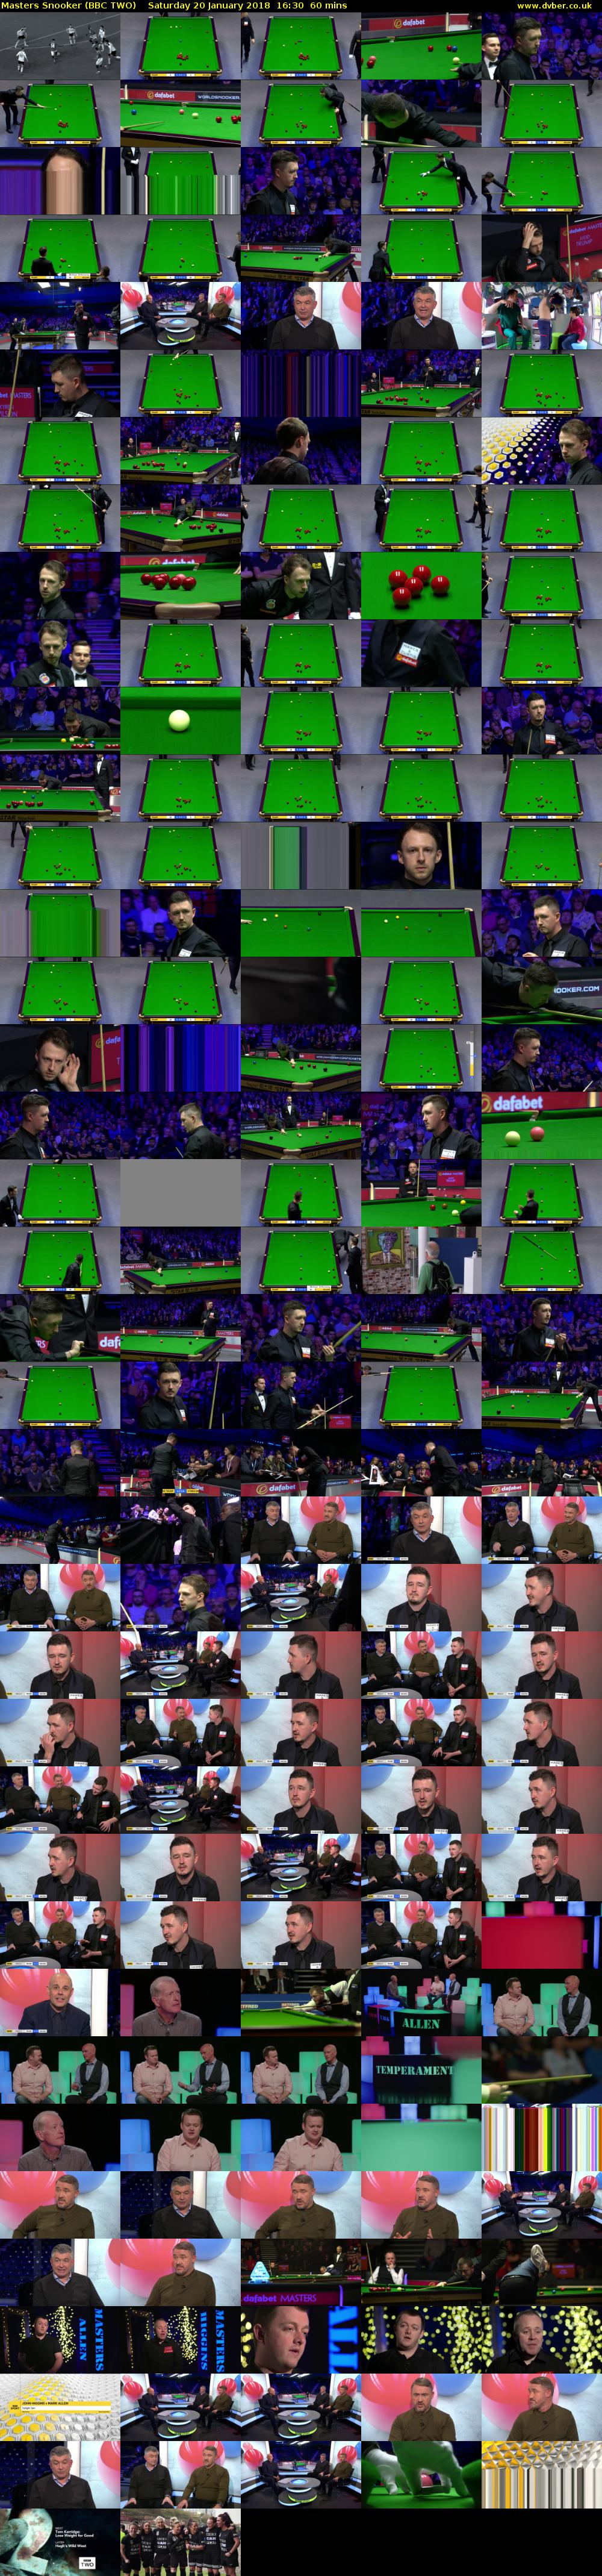 Masters Snooker (BBC TWO) Saturday 20 January 2018 16:30 - 17:30